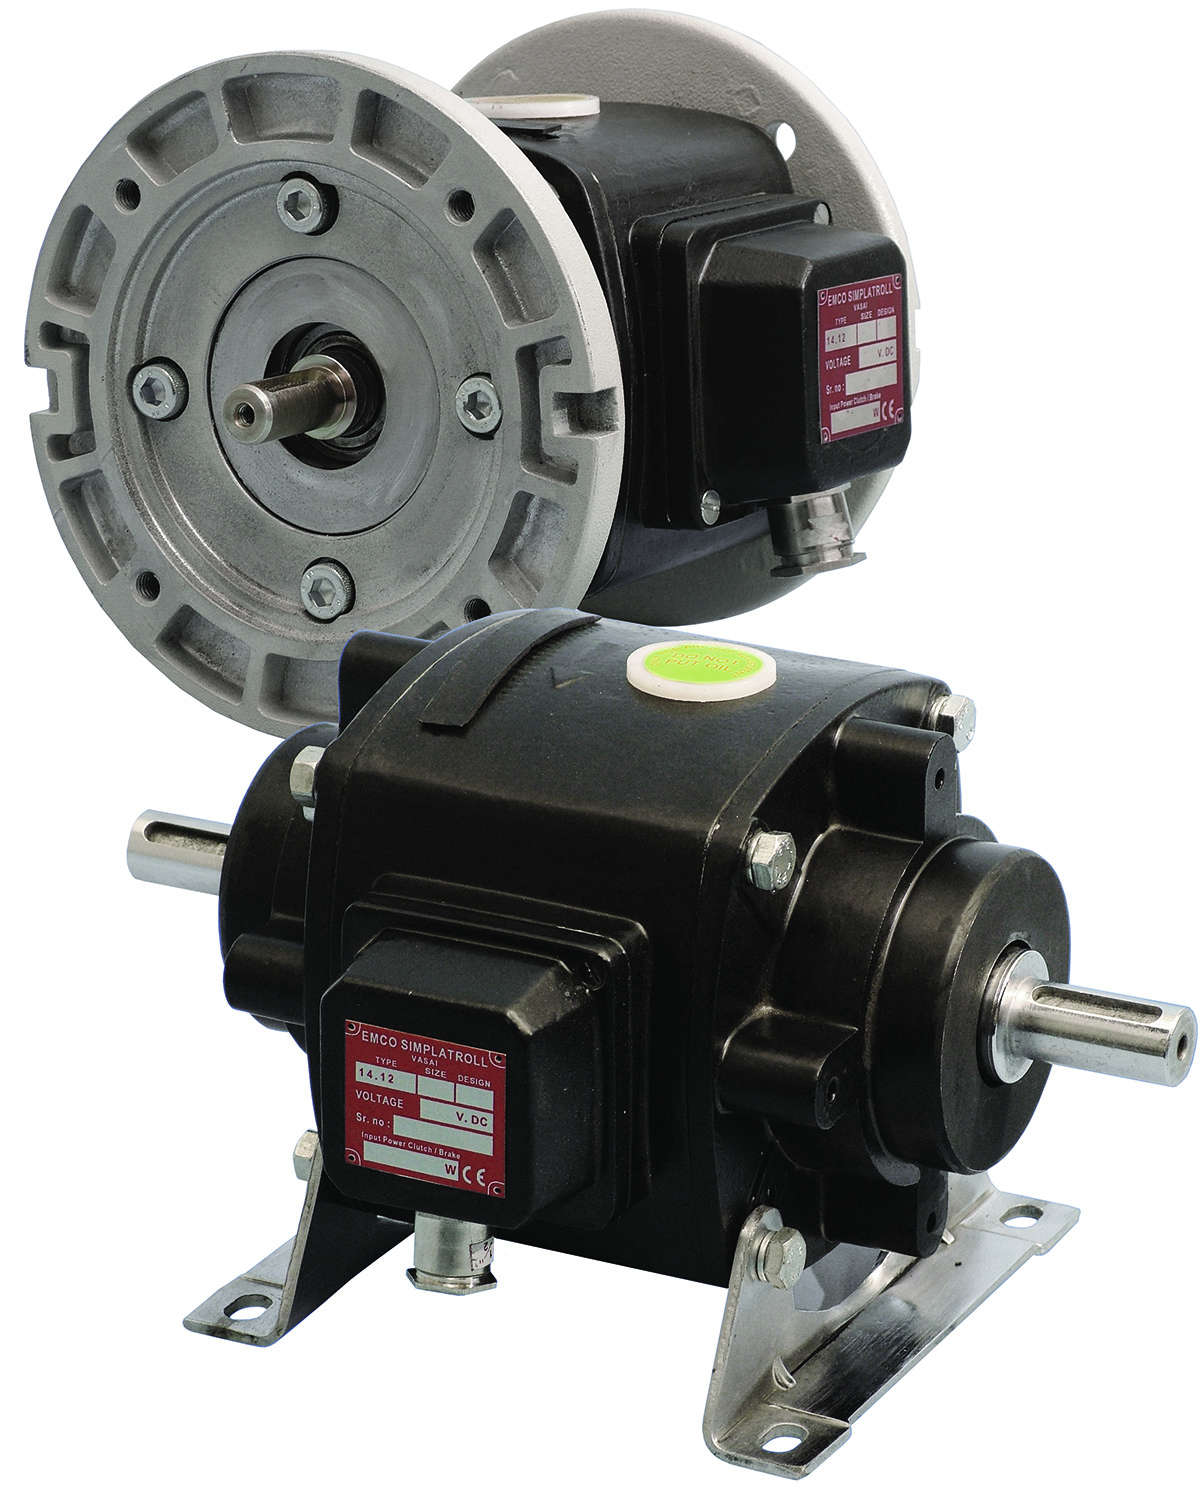 Flange and Foot Mounted Clutch-Brakes